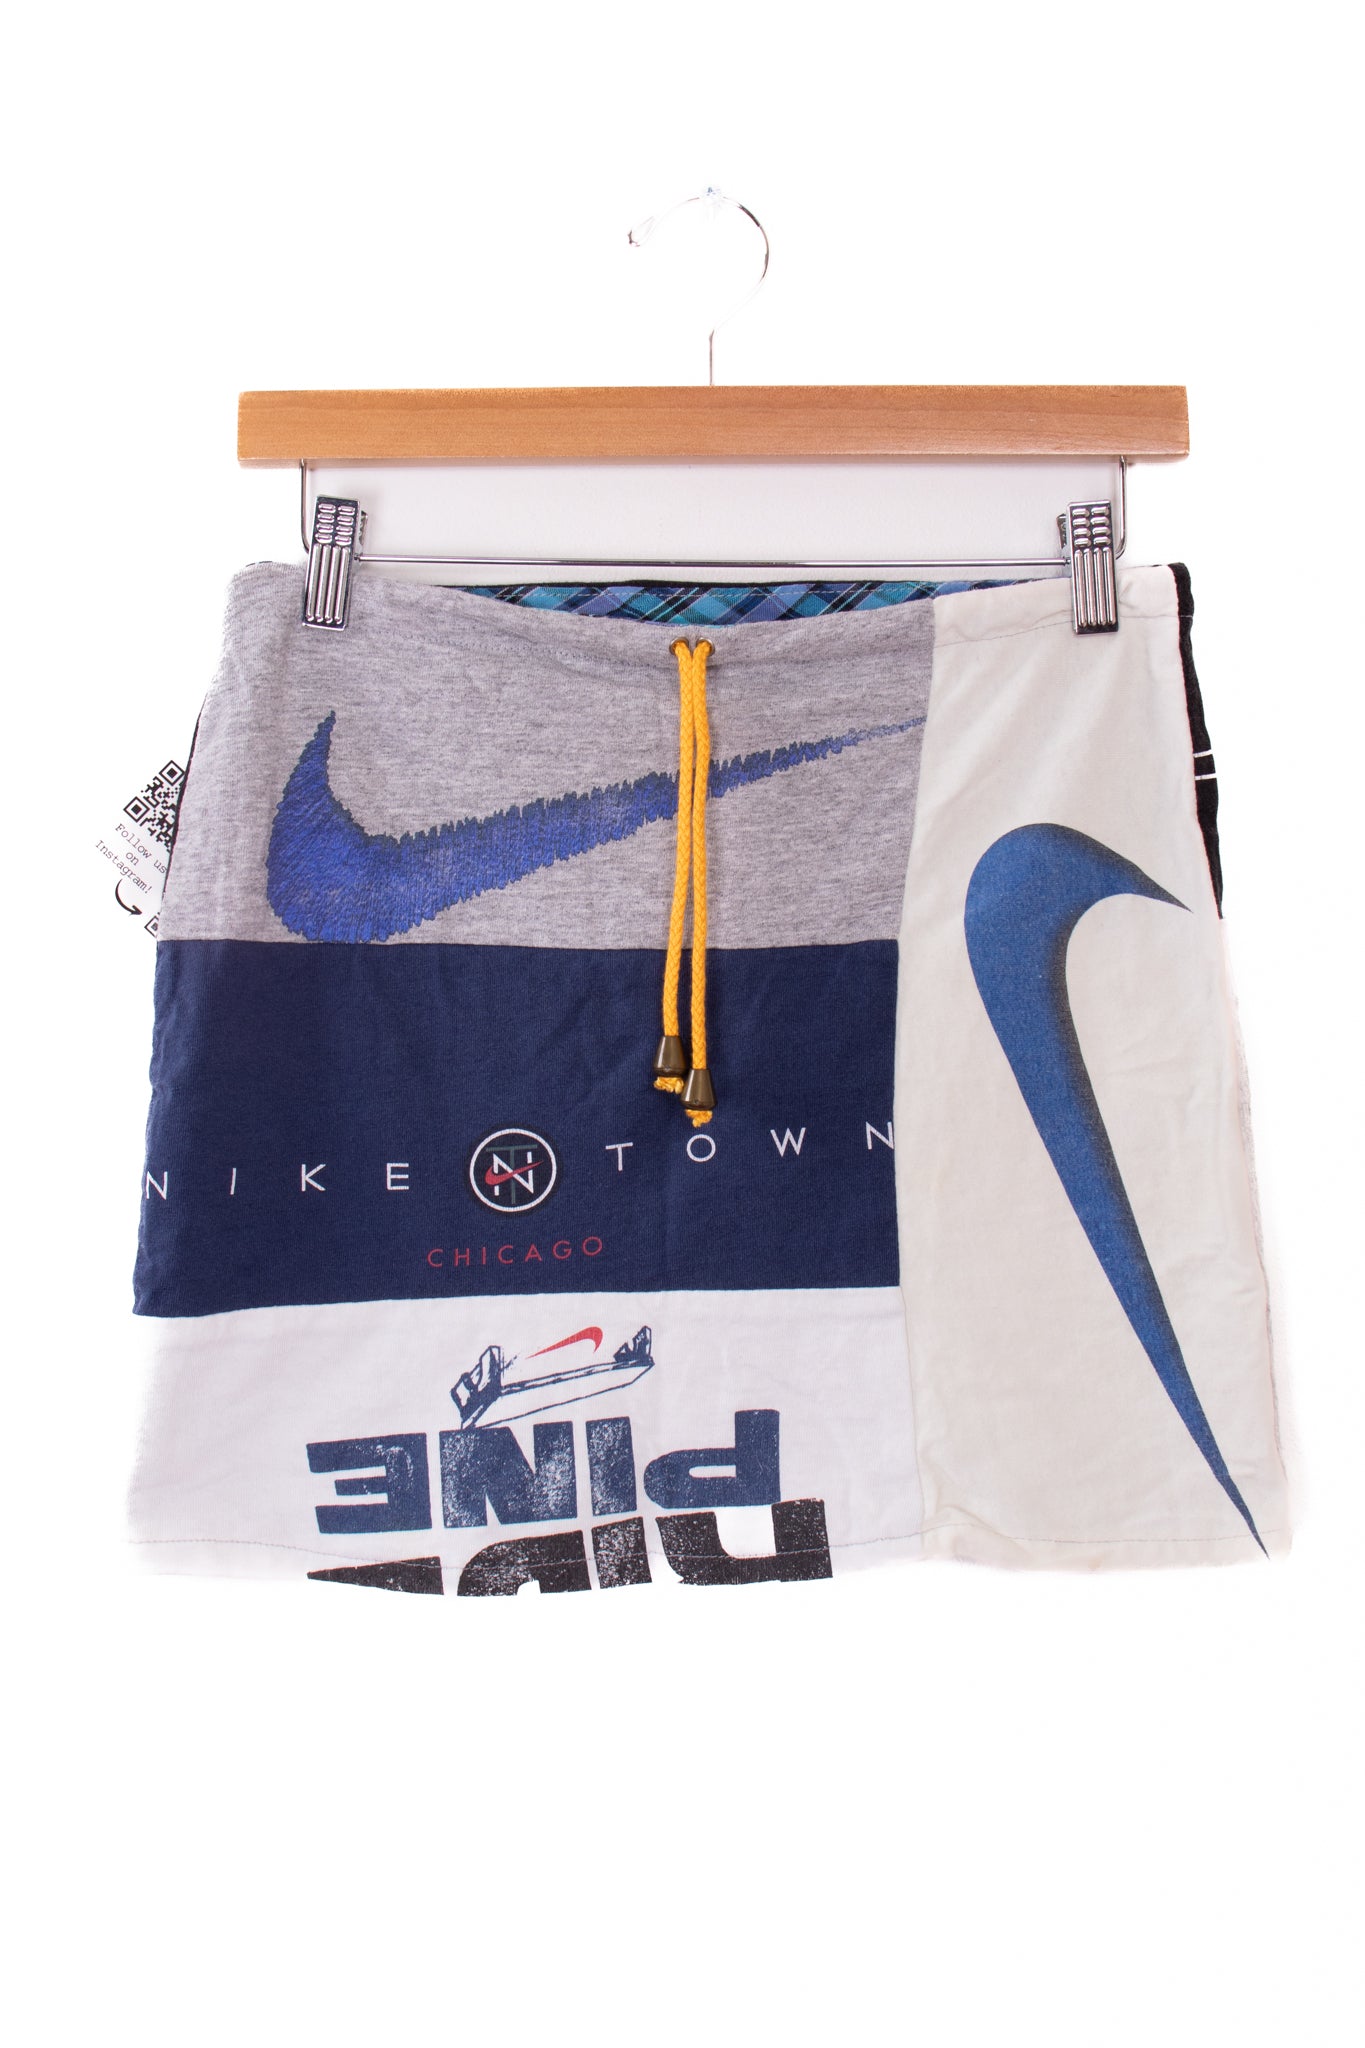 Nike Blue and Black Reworked Skirt